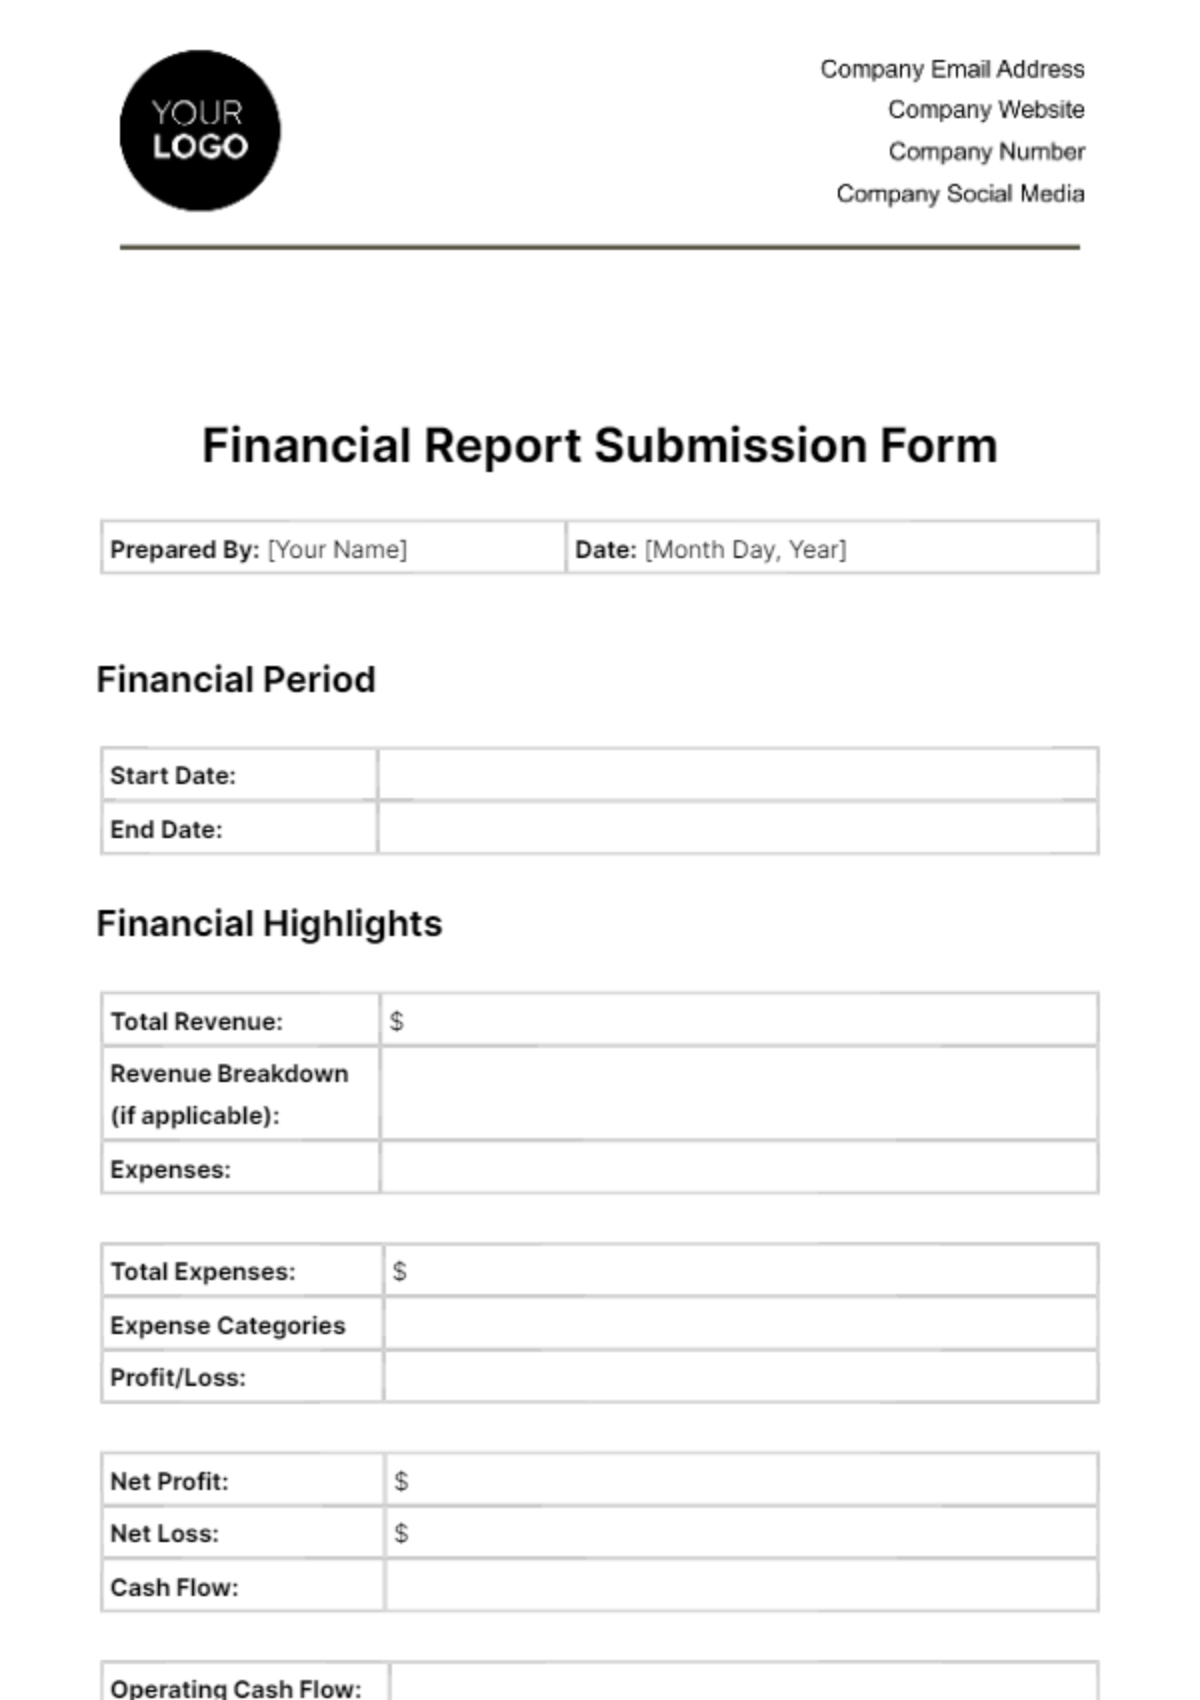 Free Financial Report Submission Form Template